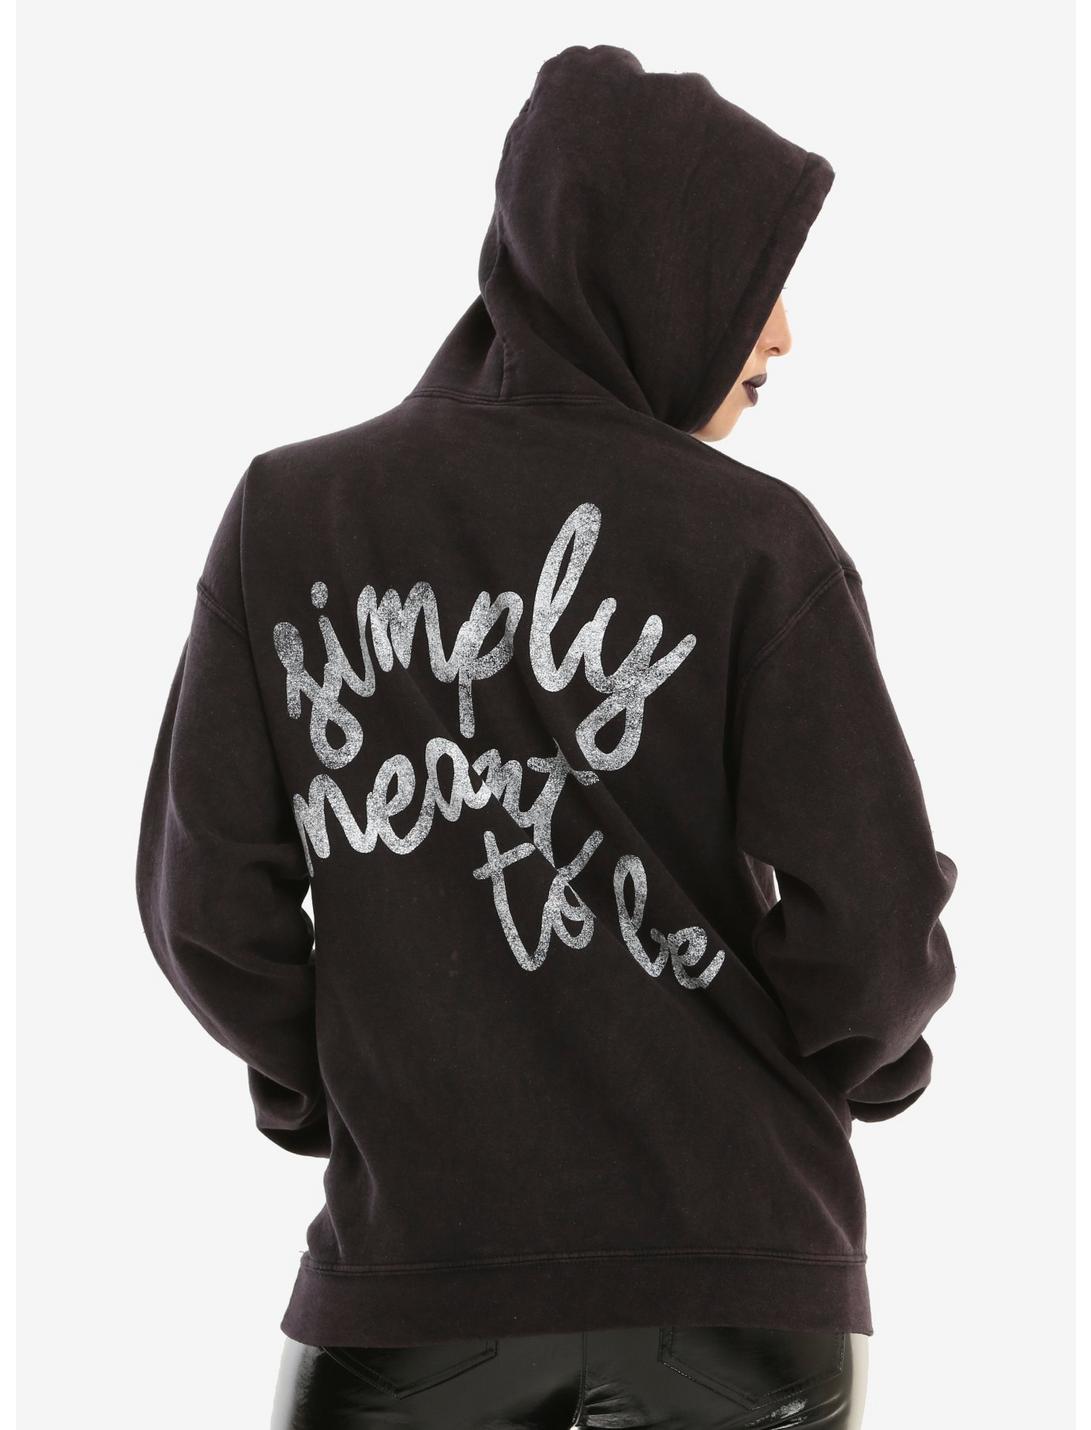 The Nightmare Before Christmas Simply Meant To Be Girls Hoodie, BLACK, hi-res